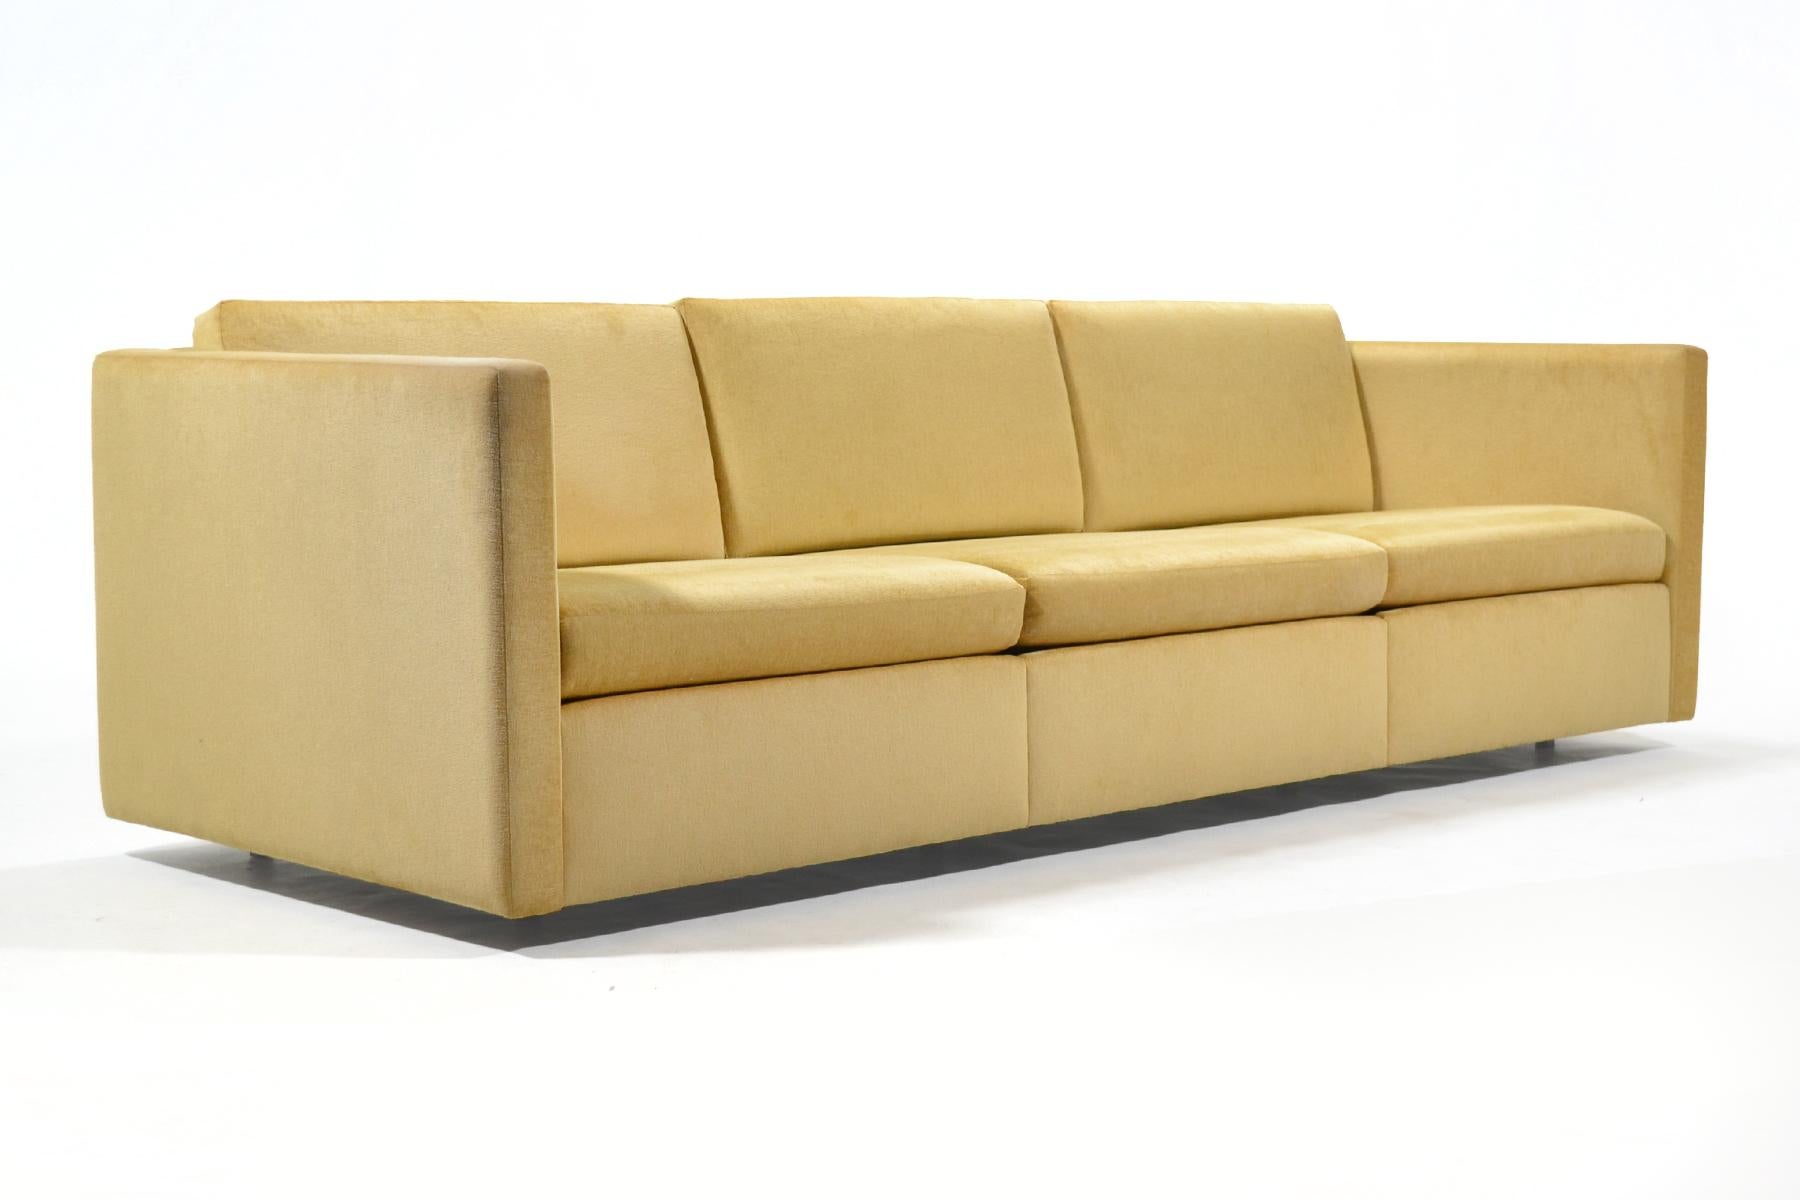 Charles Pfister's 1971 sofa design for Knoll is a classic minimal design which works in any interior. The small, black legs are set back to impart a 